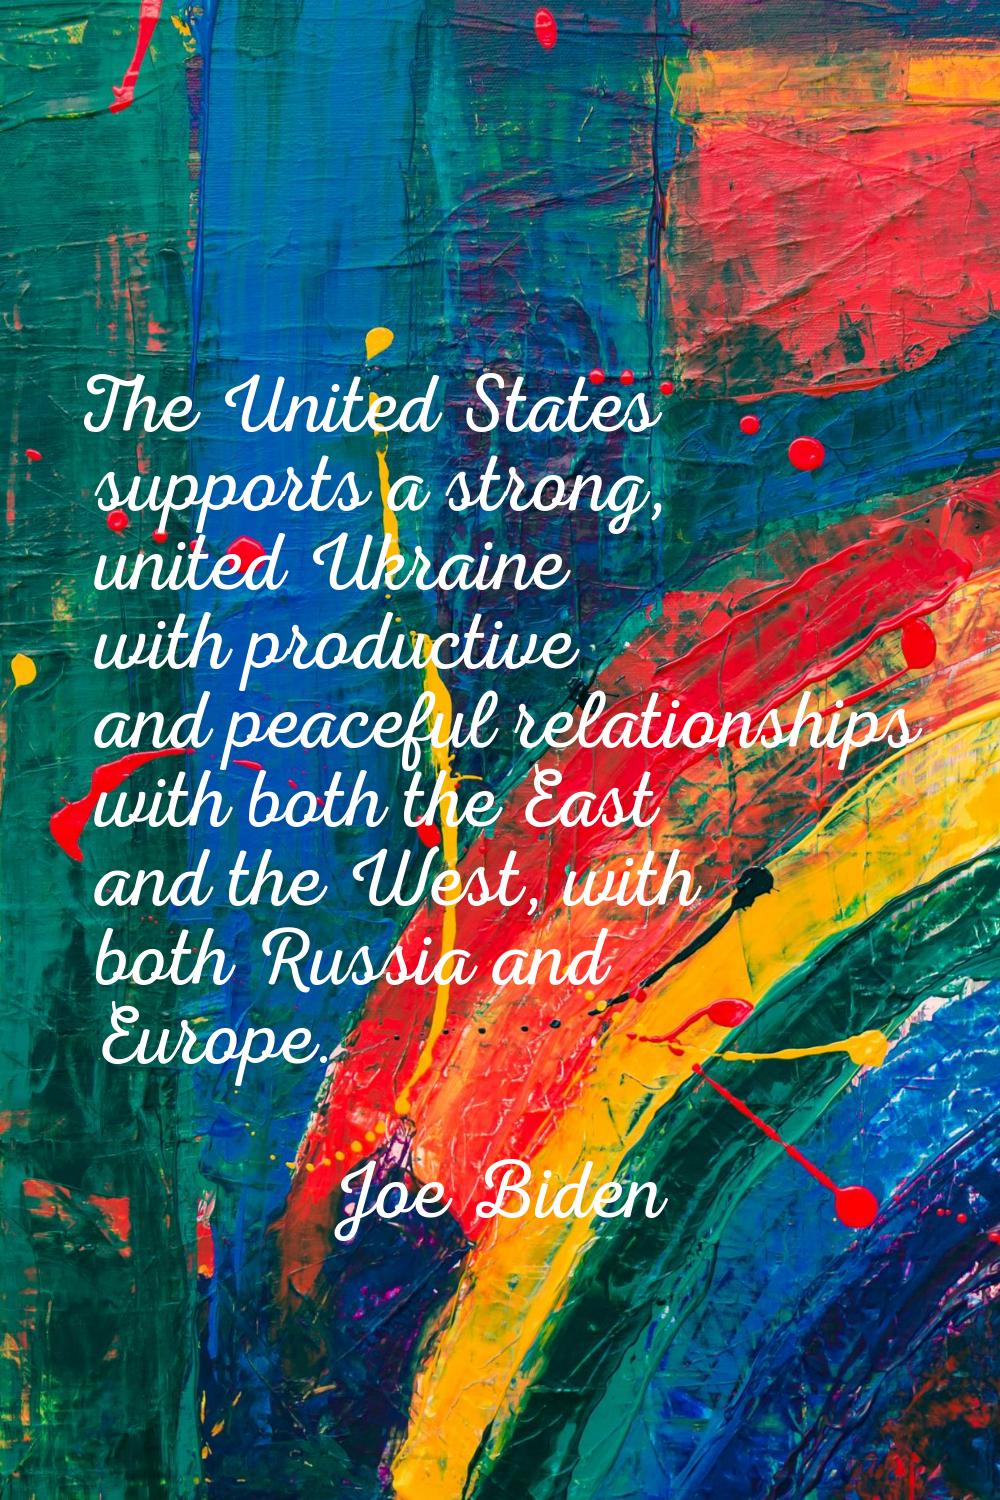 The United States supports a strong, united Ukraine with productive and peaceful relationships with